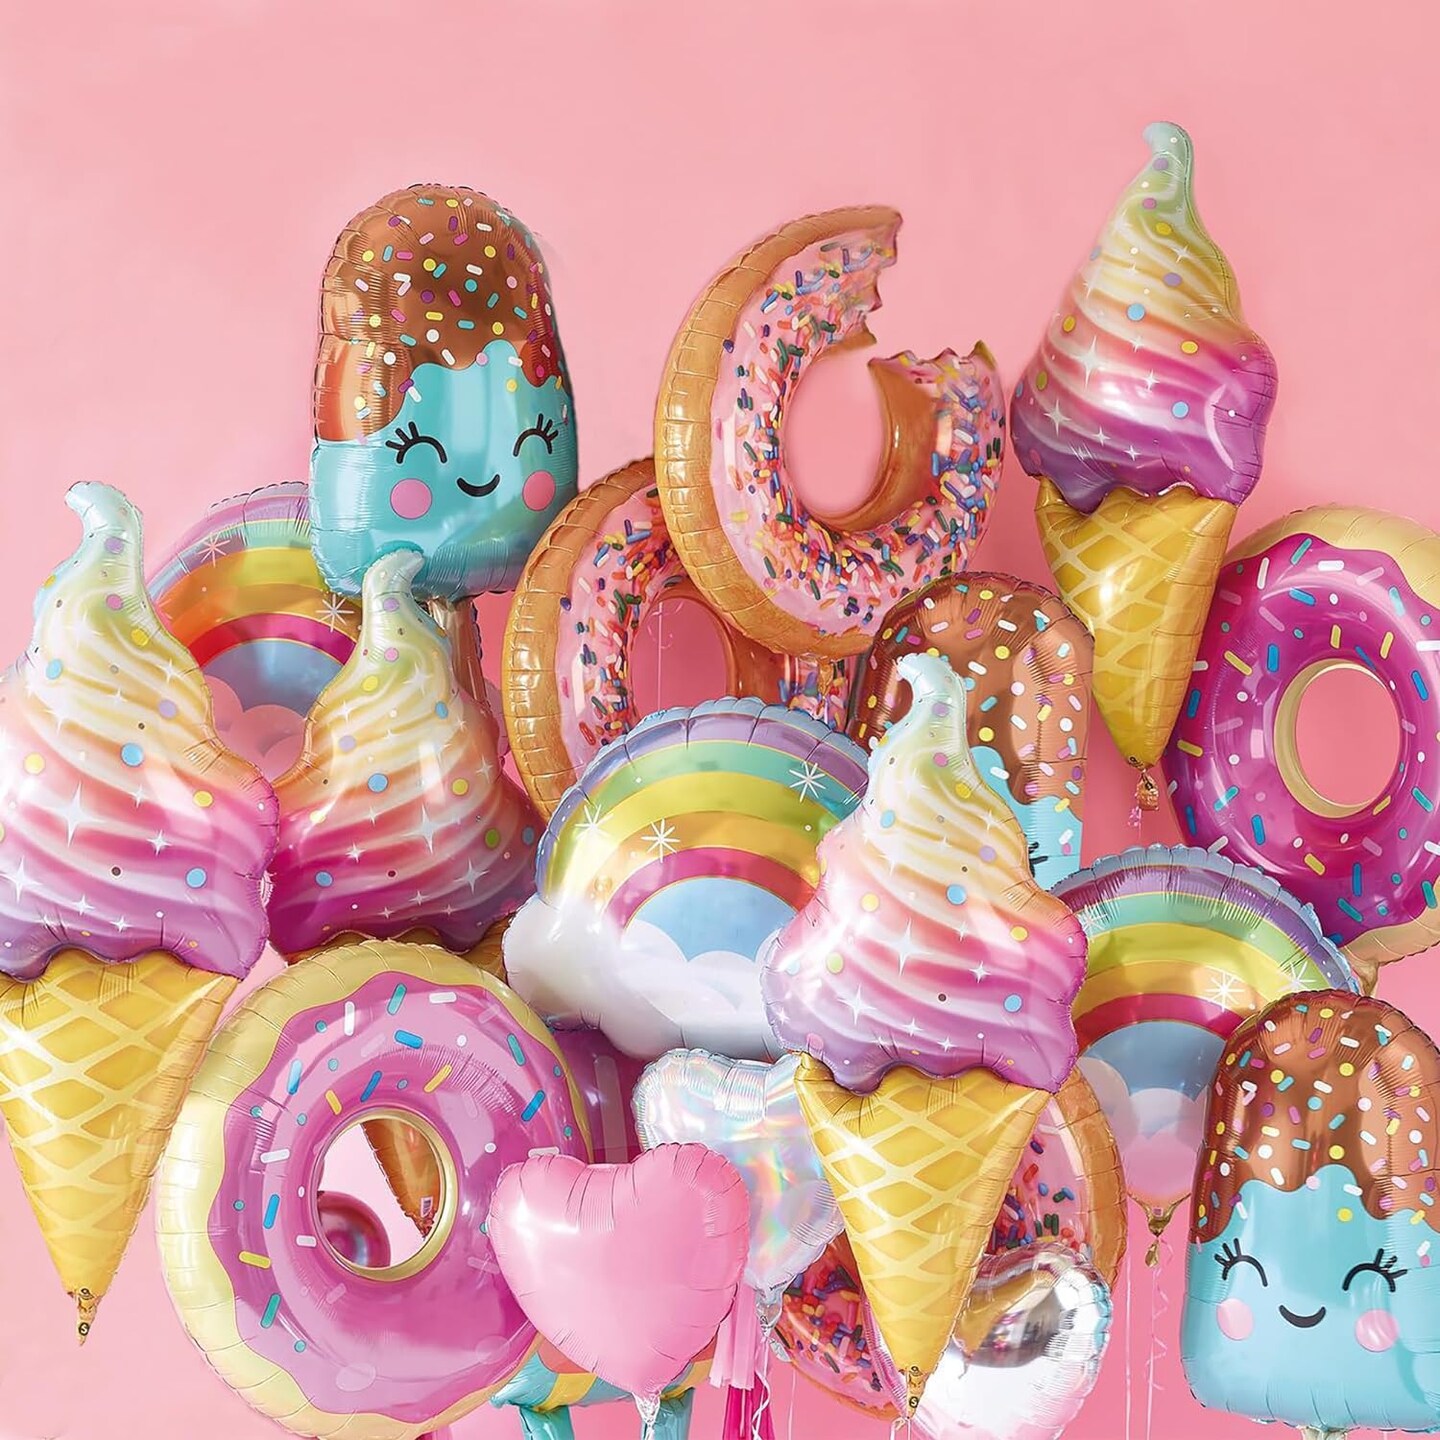 Ice Cream Party Decorations,Candyland 17Pcs Donut Rainbow Cloud Popsicle Heart Foil Balloons for Two Sweet One Birthday Girl&#x27;s Baby Shower Pool Beach Summer Party Favors Supplies